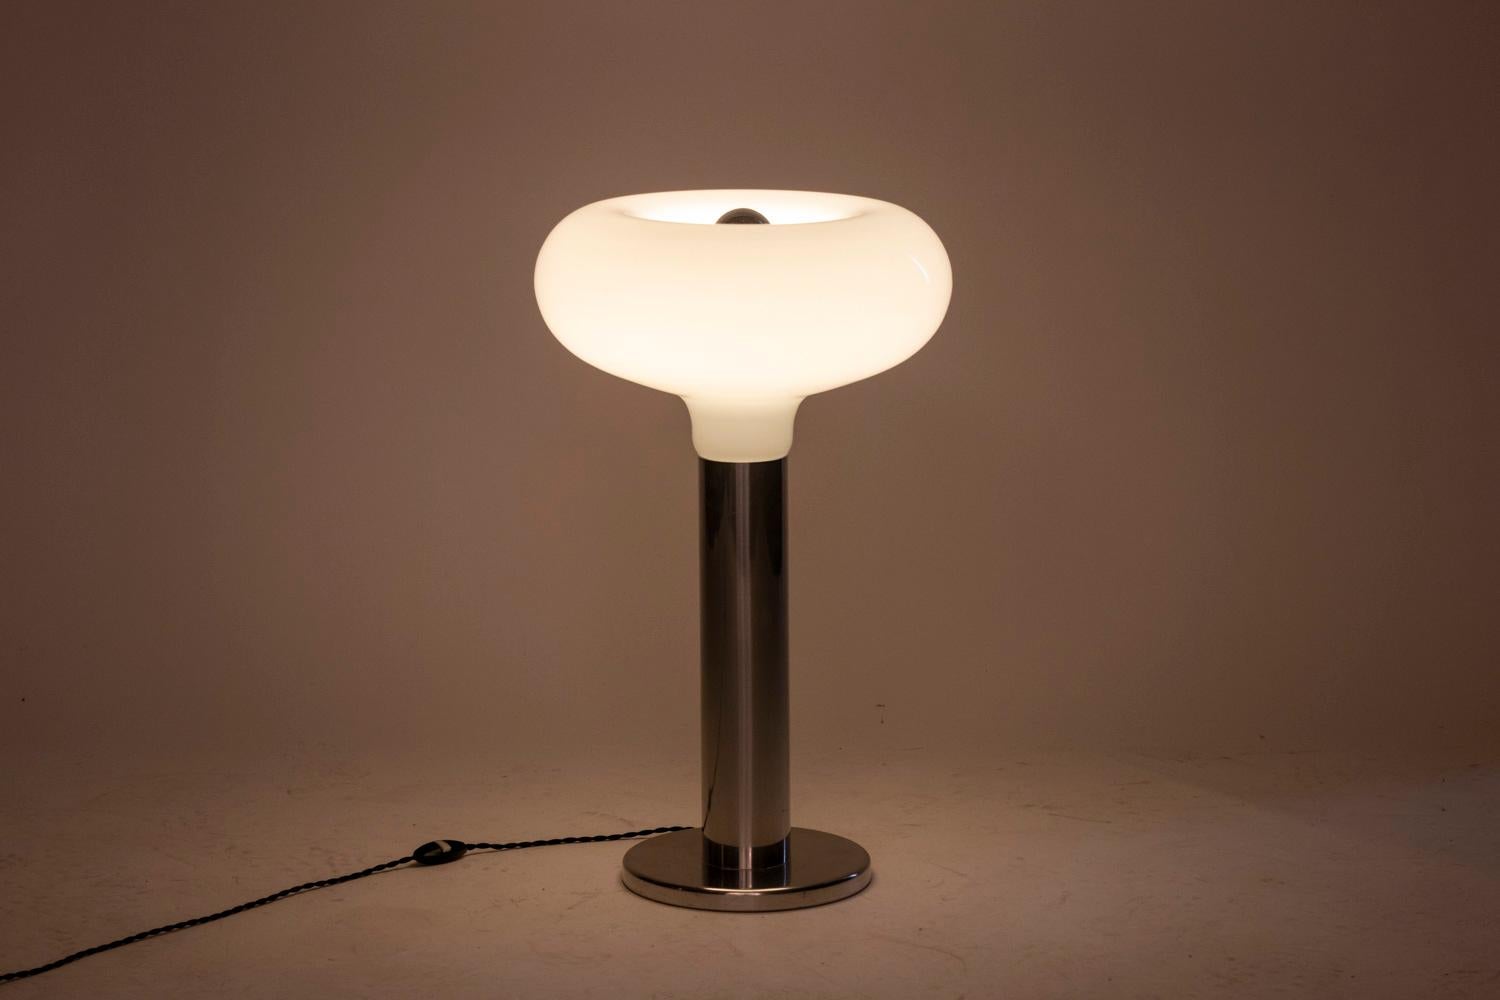 Circular shaped lamp. Base in polished aluminum and white opaline.

Italian work realized in the 1970s.

New and functional electrical system.